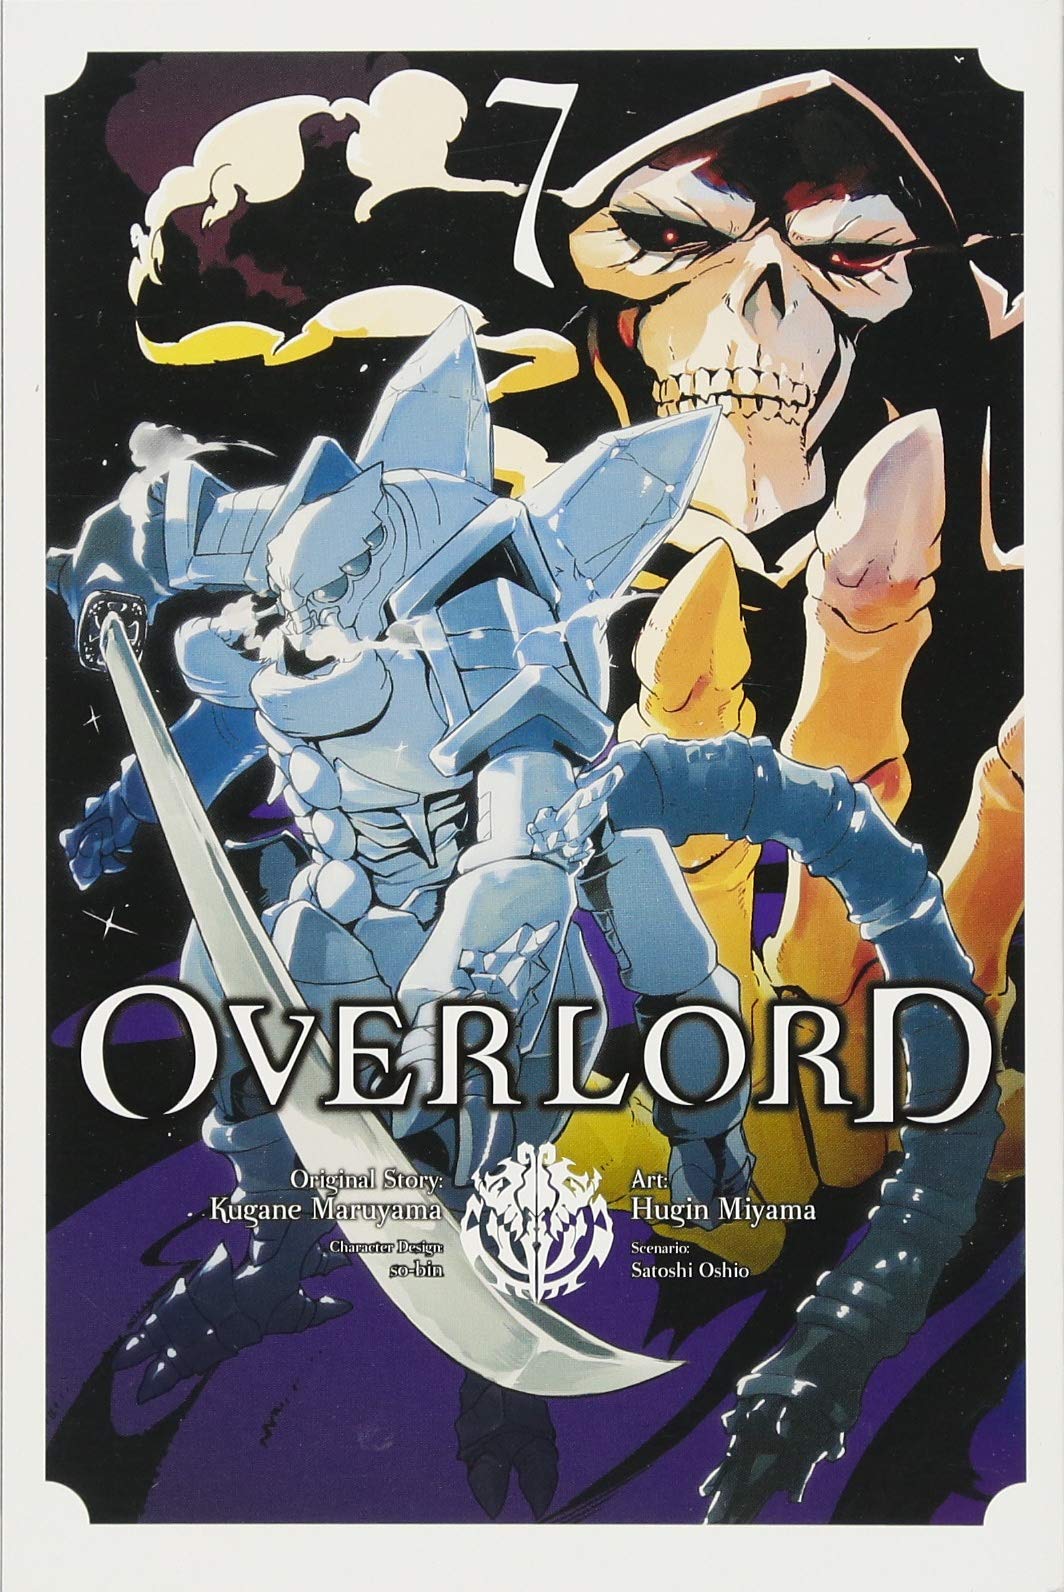 Overlord manga's 1st part ends, no news on 2nd part